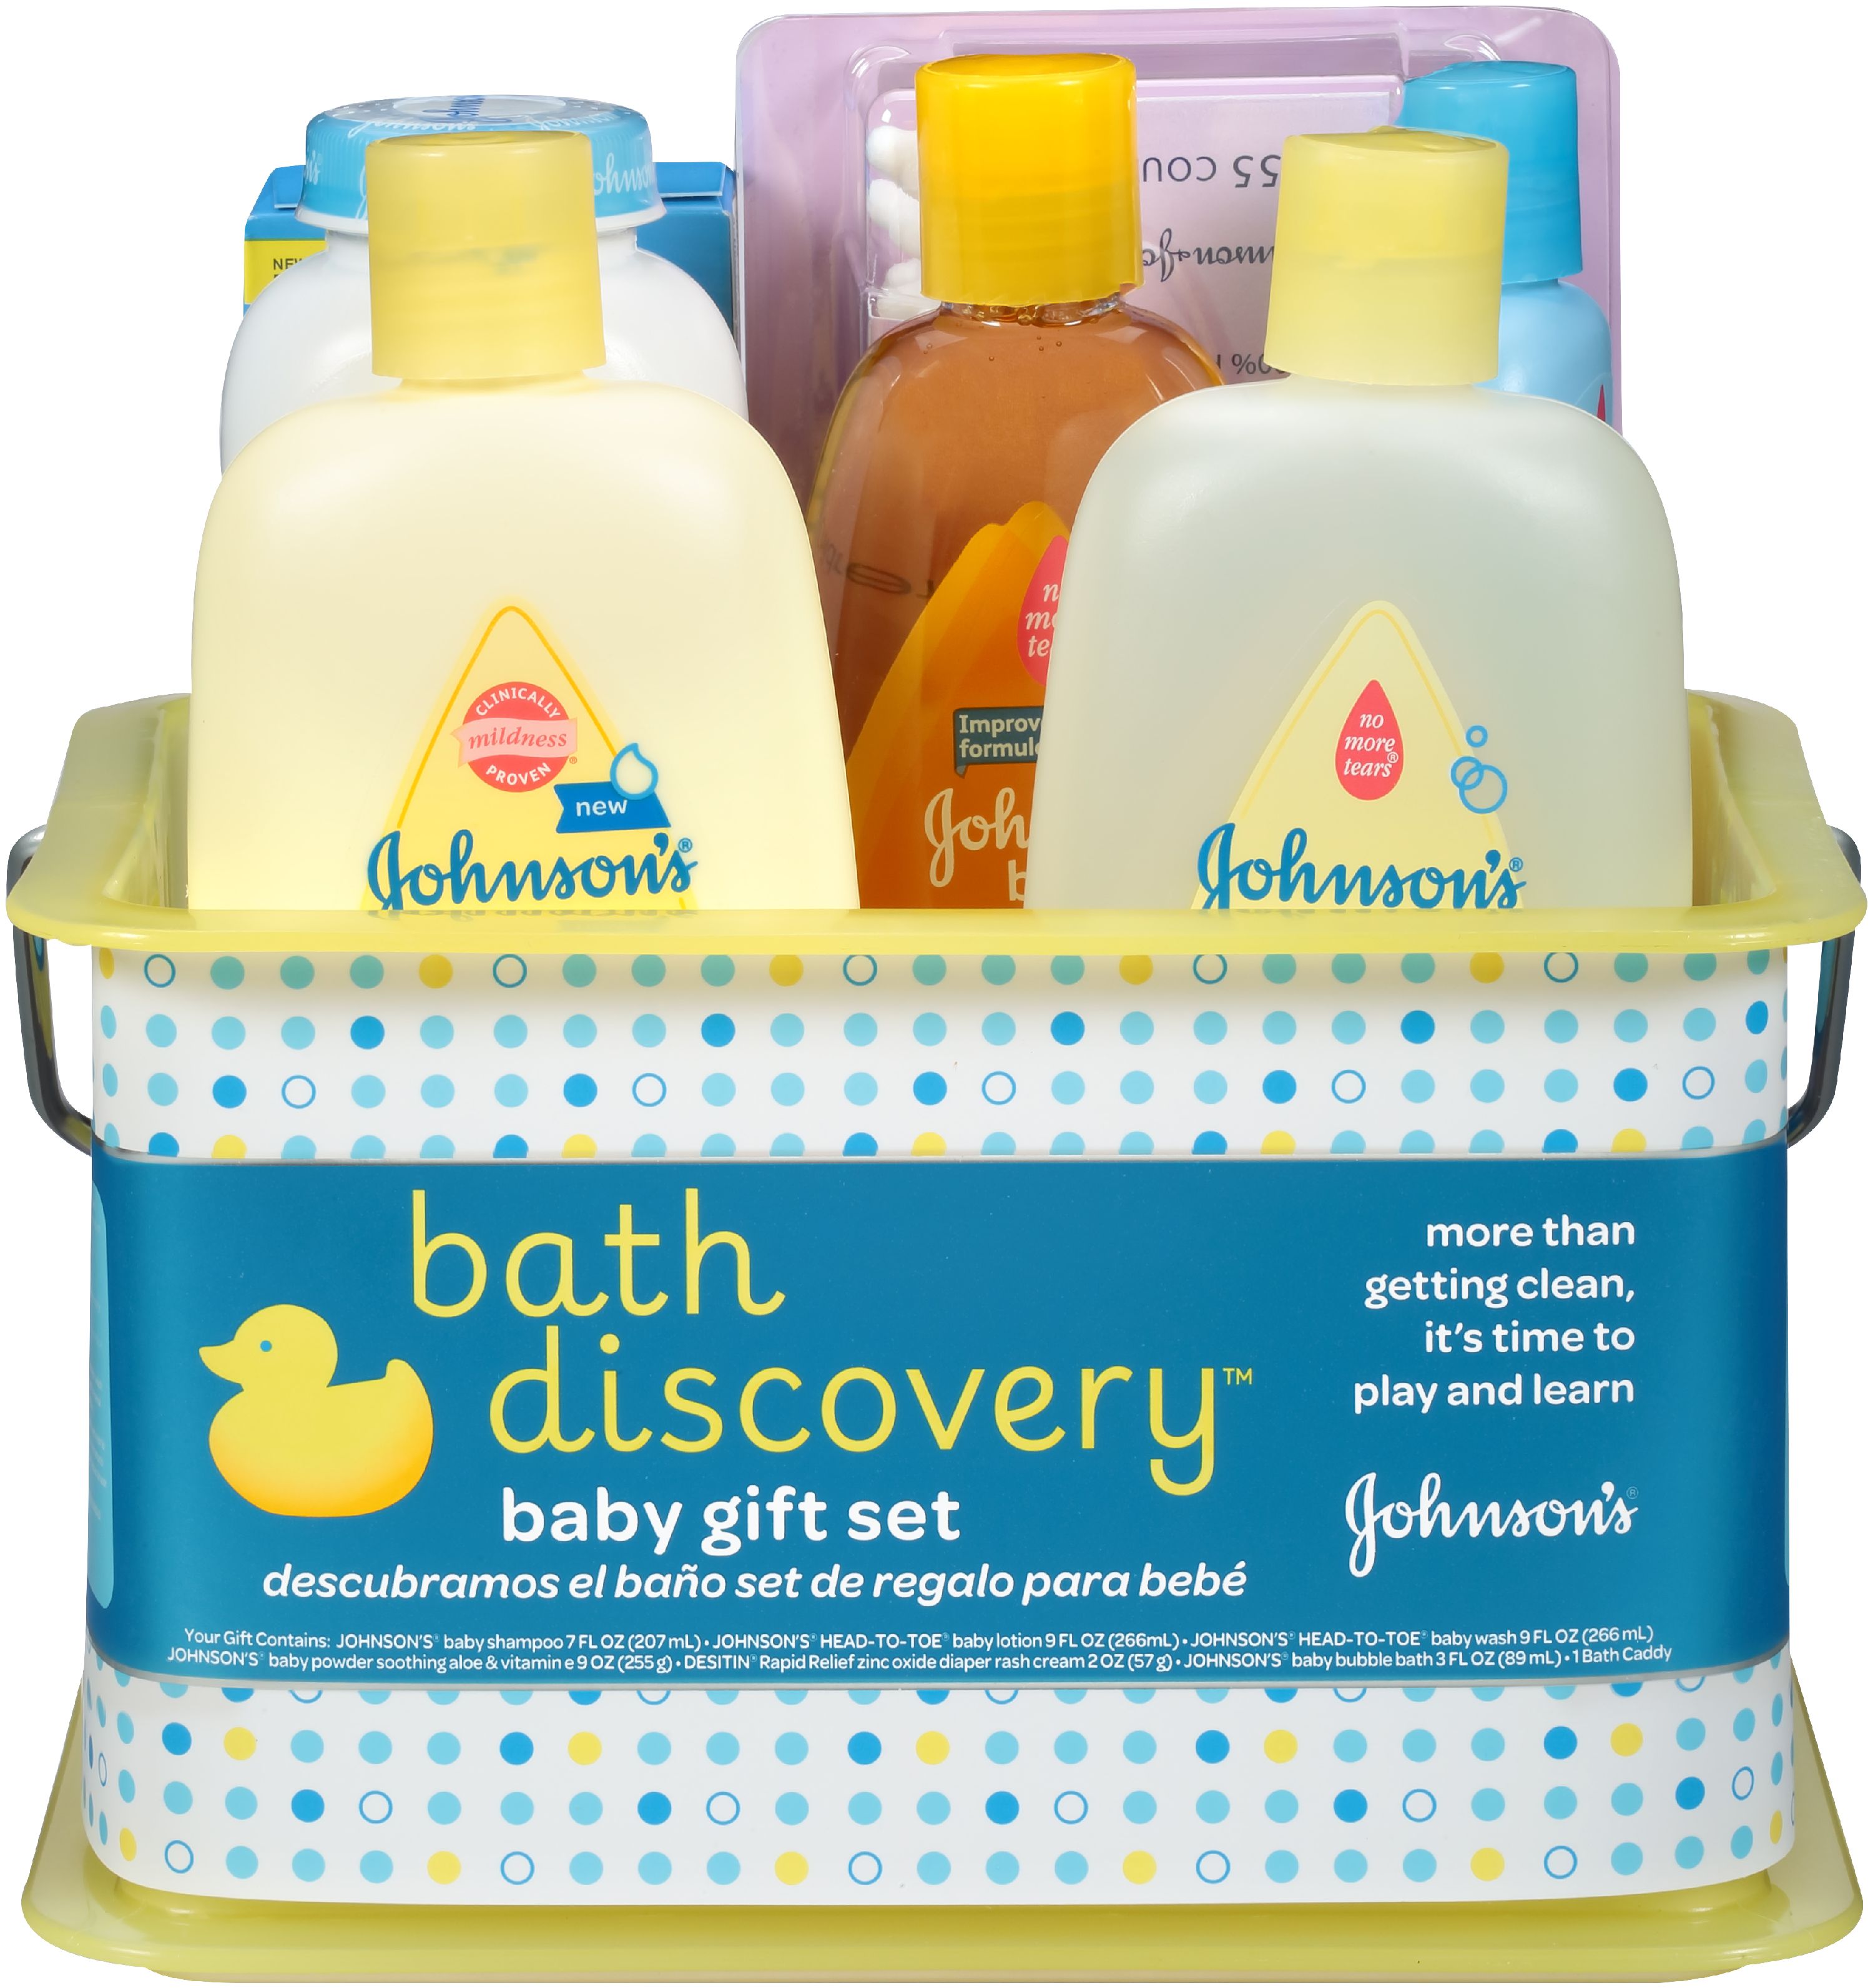 JOHNSON'S BATH DISCOVERY Baby Gift Set, 8 Items - image 1 of 3